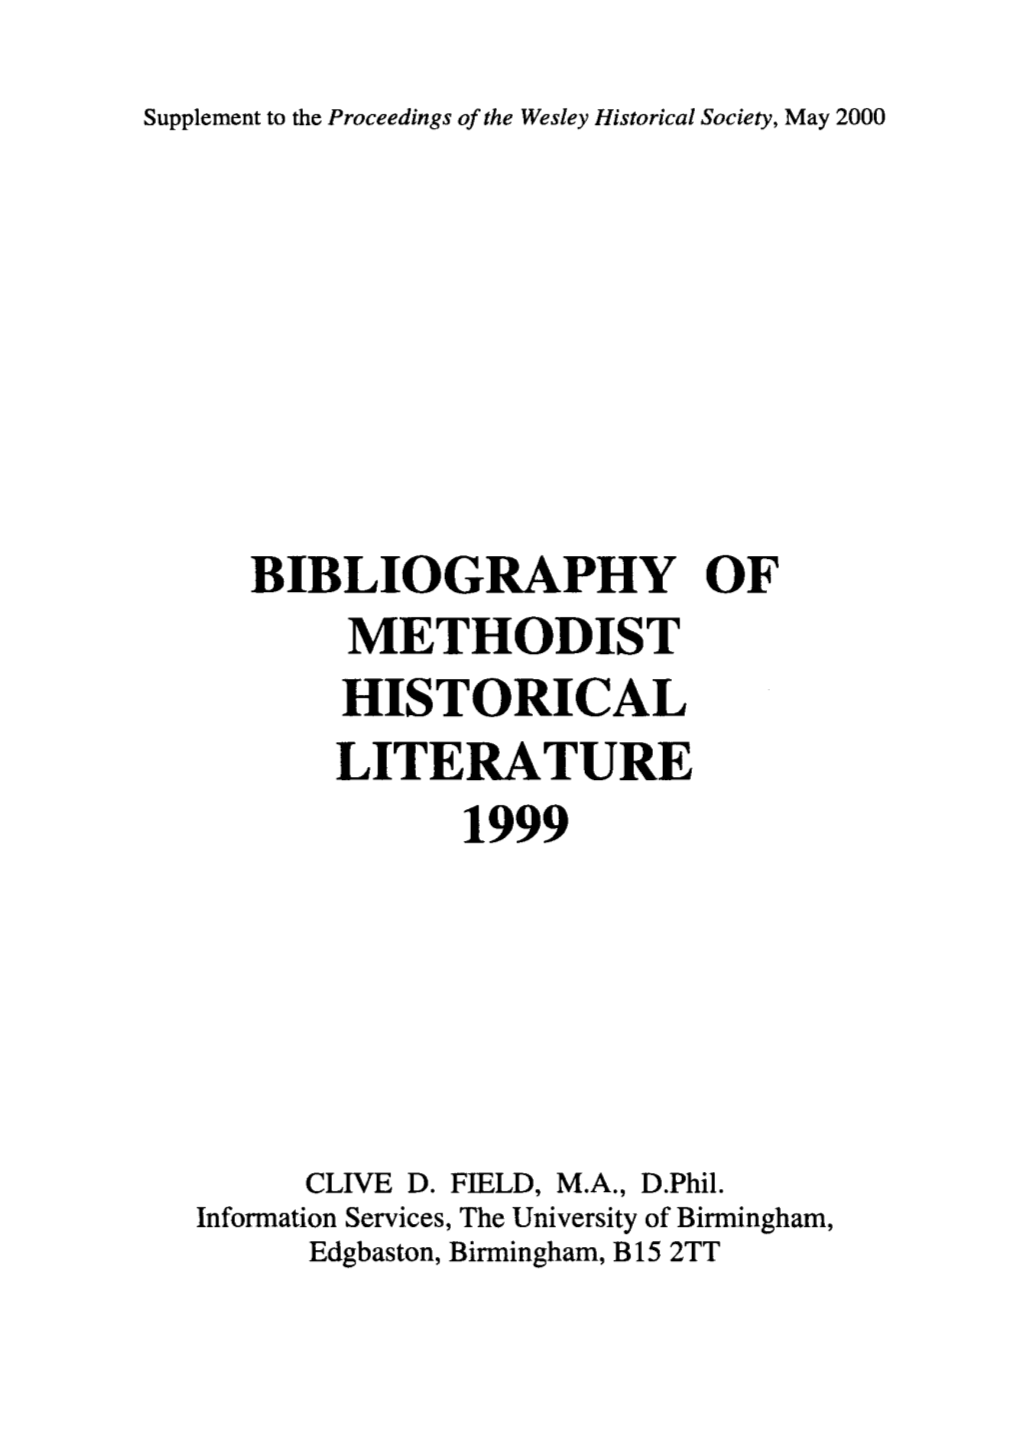 Clive D. Field, Bibliography of Methodist Historical Literature 1999